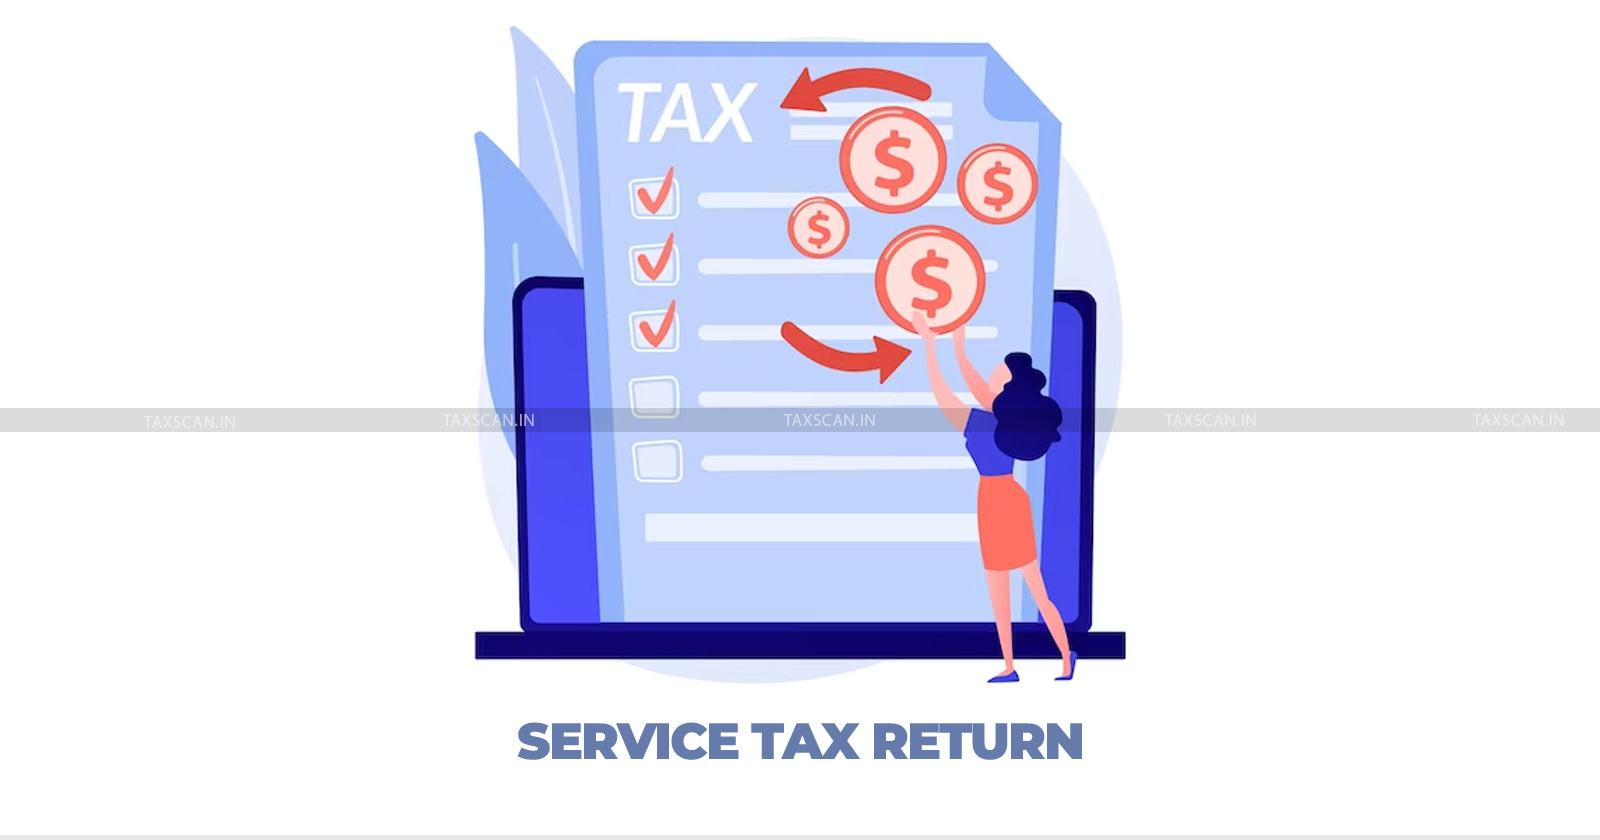 Demand for Service Tax Solely based on ST-3 Returns - Trial Balance - unjustified - Proof of Taxable Services - Burden of proof - Tax Evasion lies with Revenue - CESTAT - taxscan